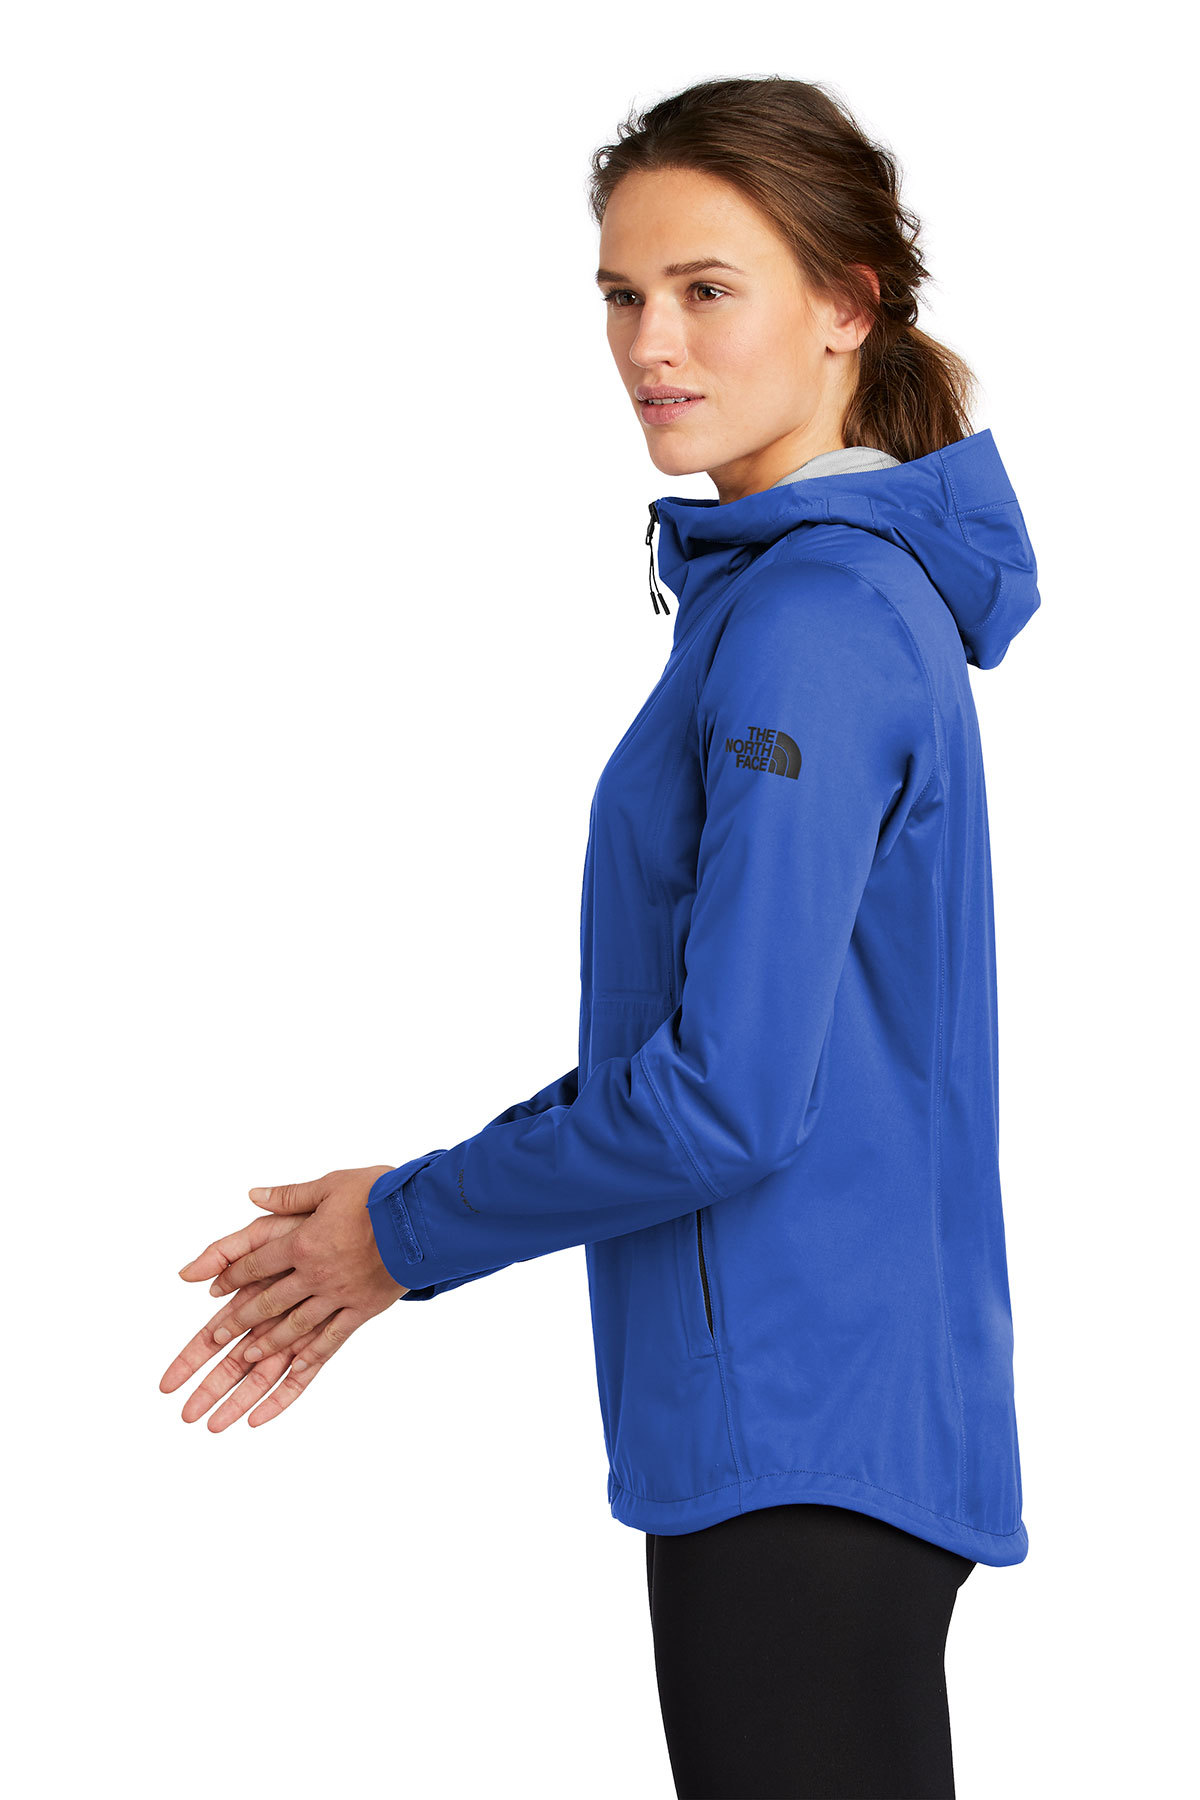 north face women's all weather jacket